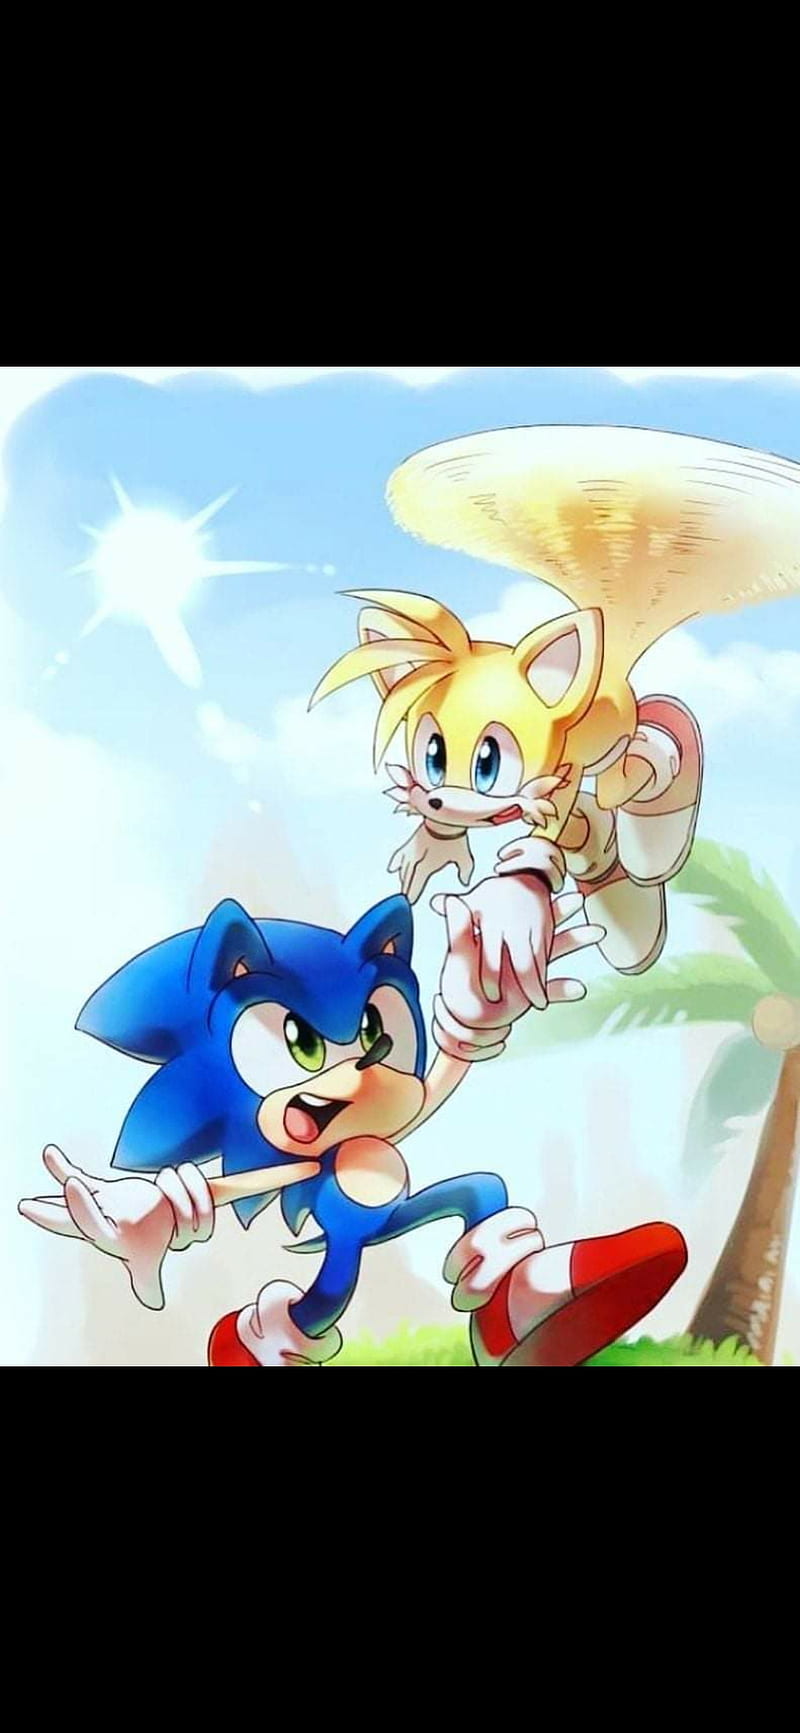 Sonic and Tails  Wallpaper by Knuxy7789 on DeviantArt